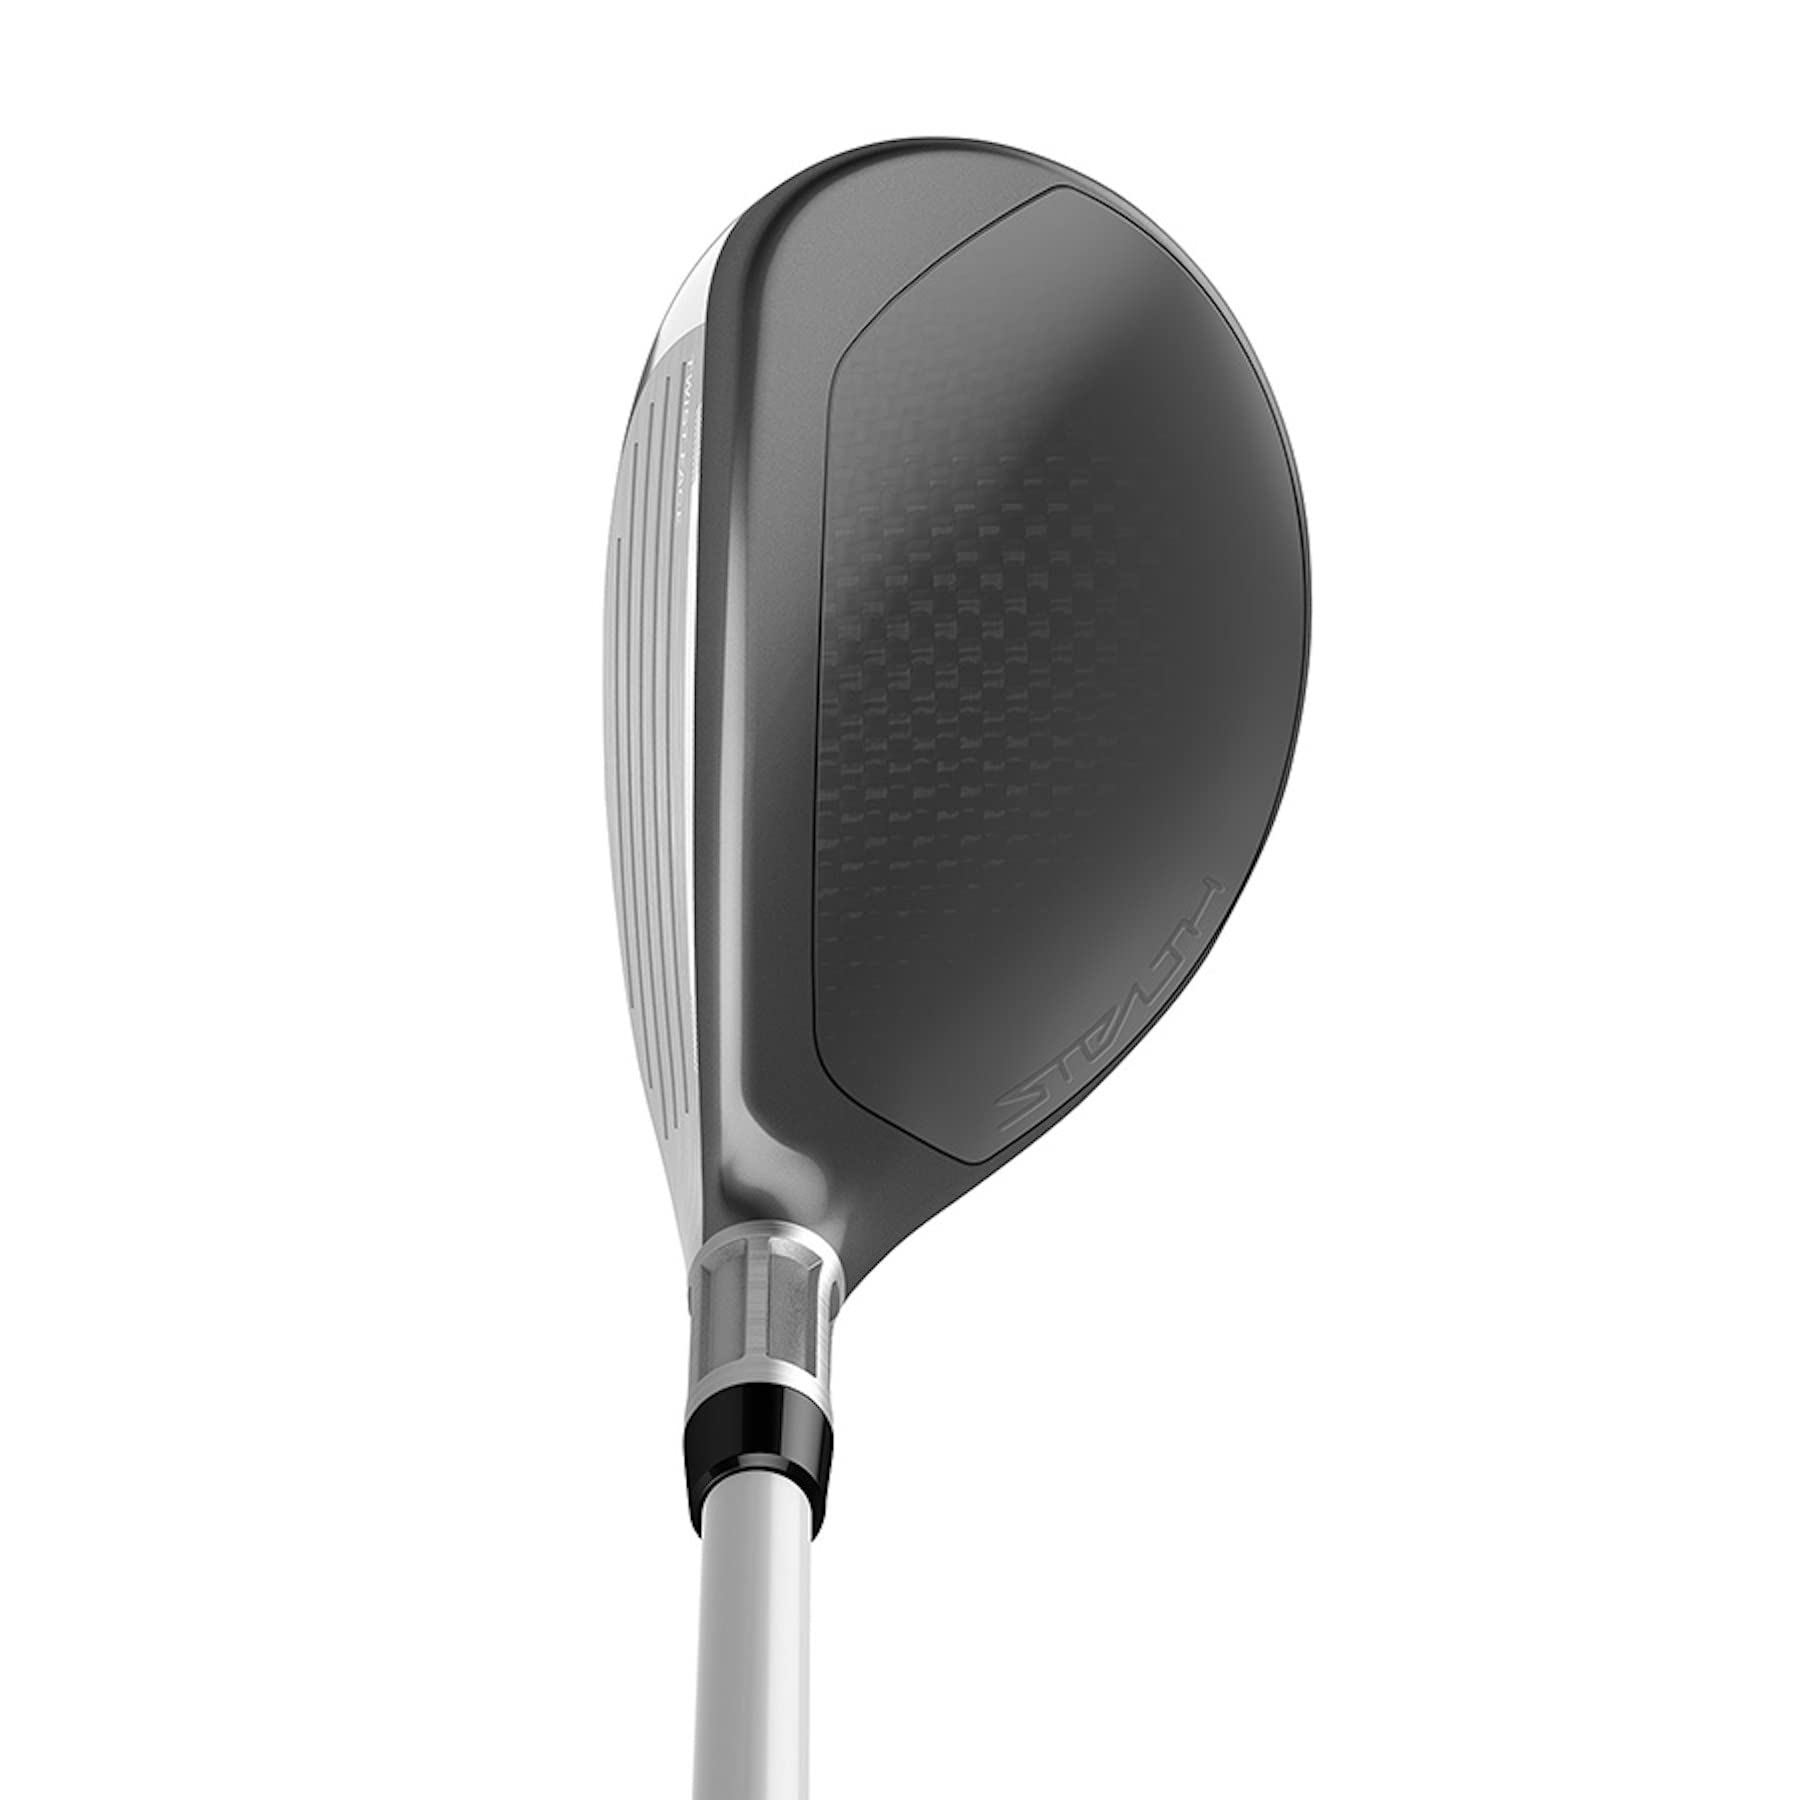 TaylorMade Stealth Ladies Combo Set